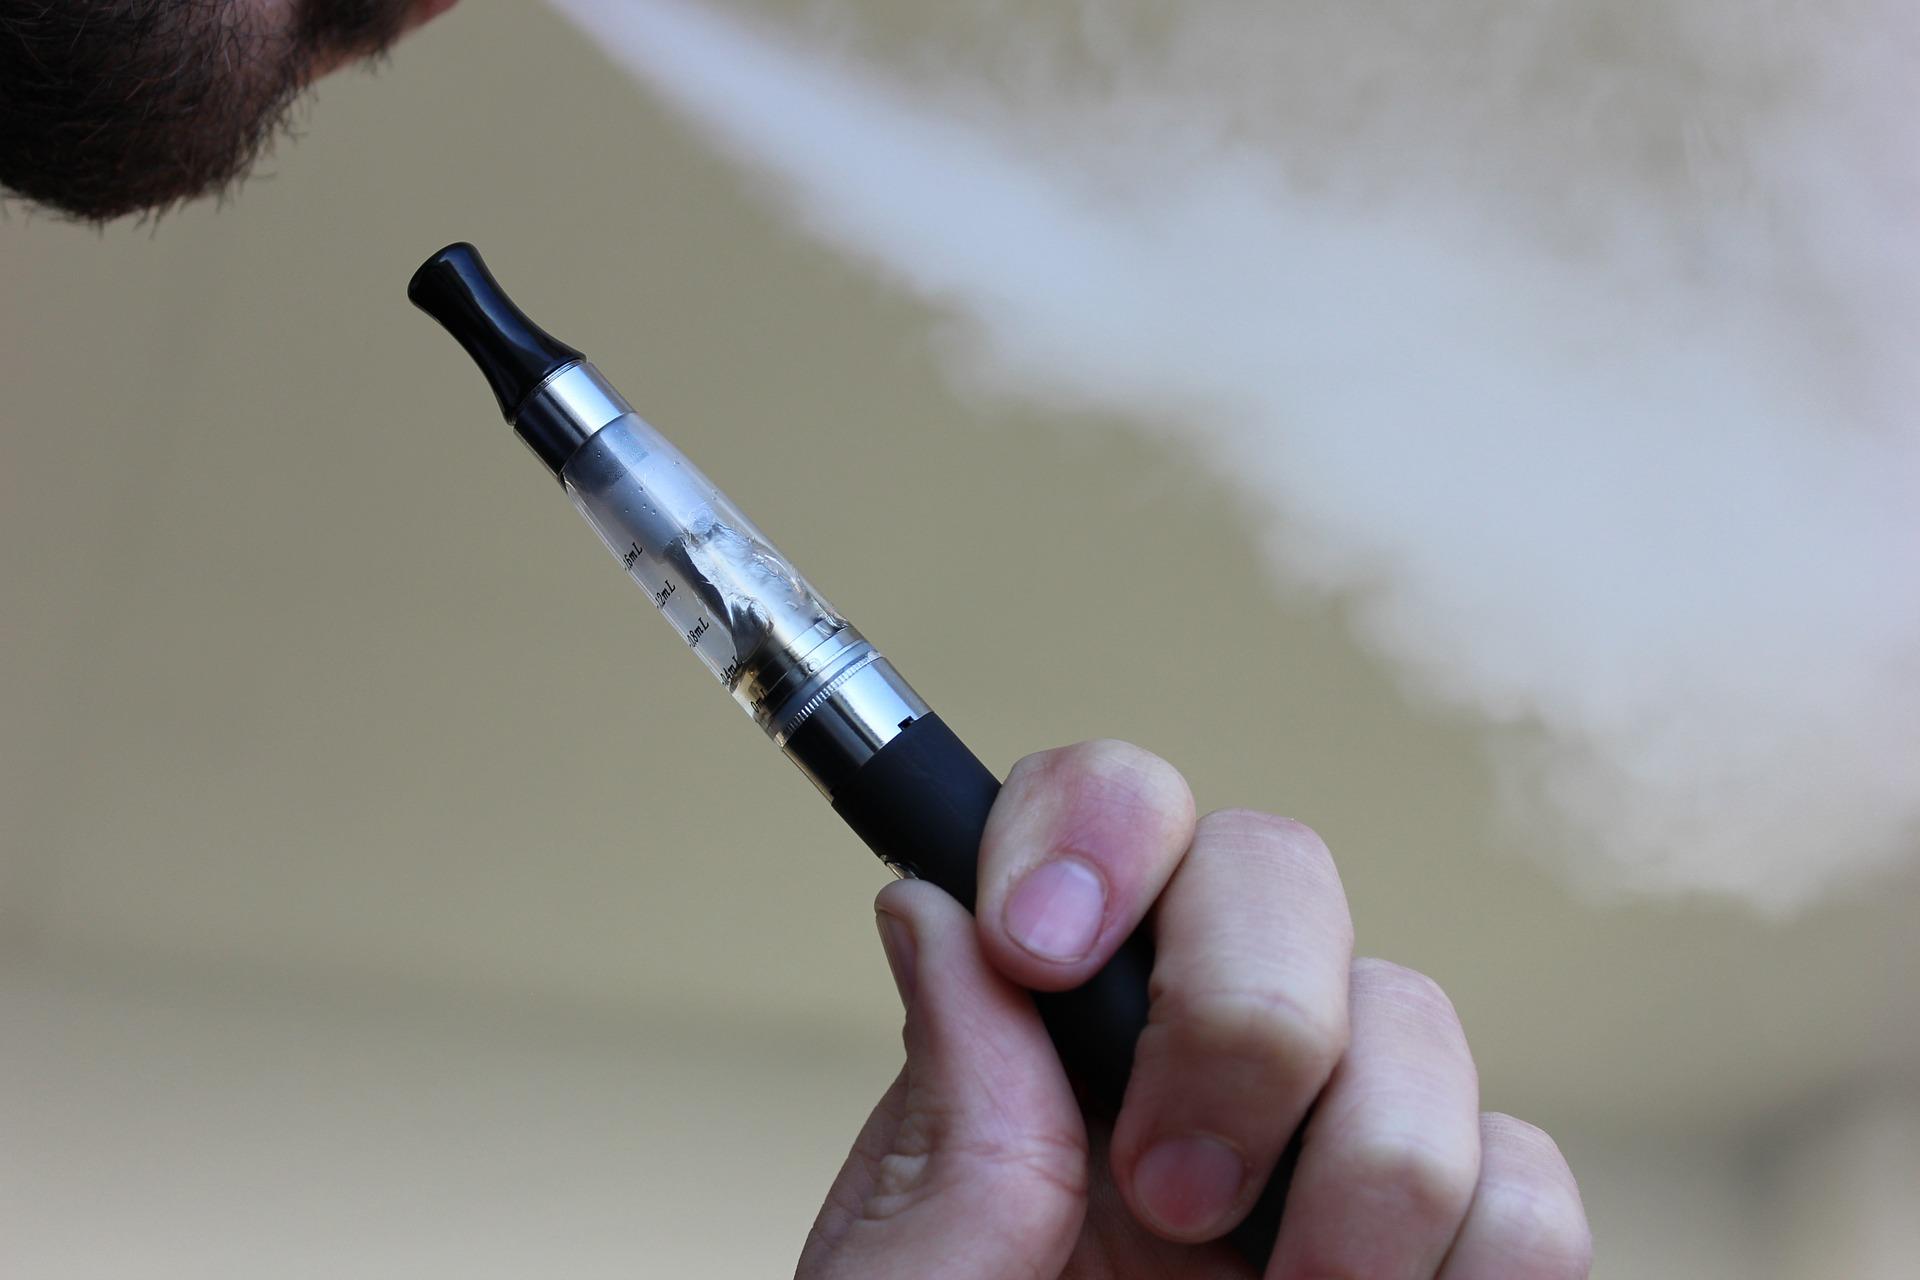 Vape Pen Explosion Causes First, Second Degree Burns to Louisiana Man